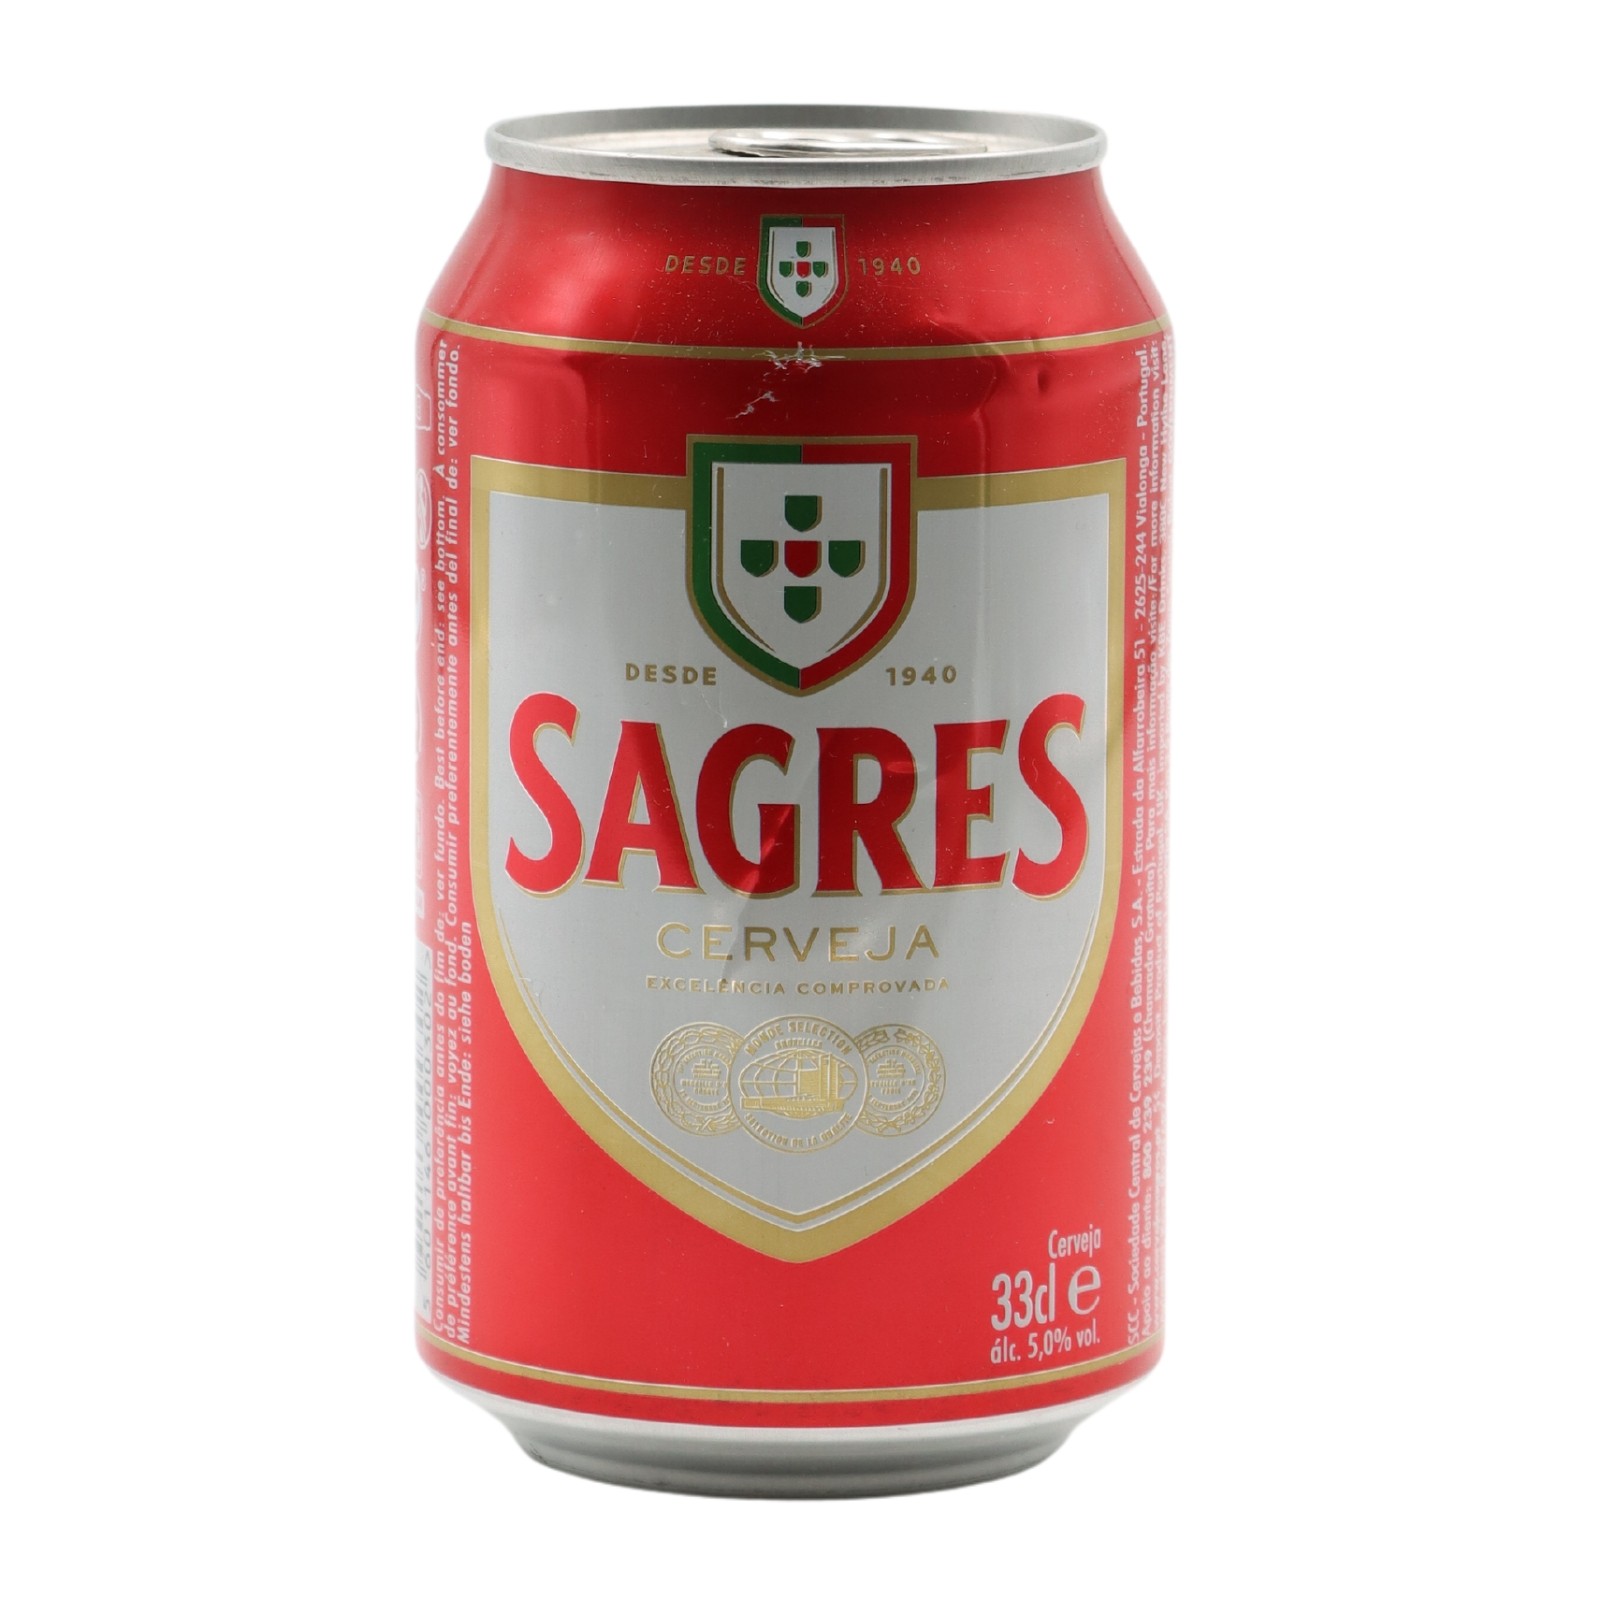 Sagres in can